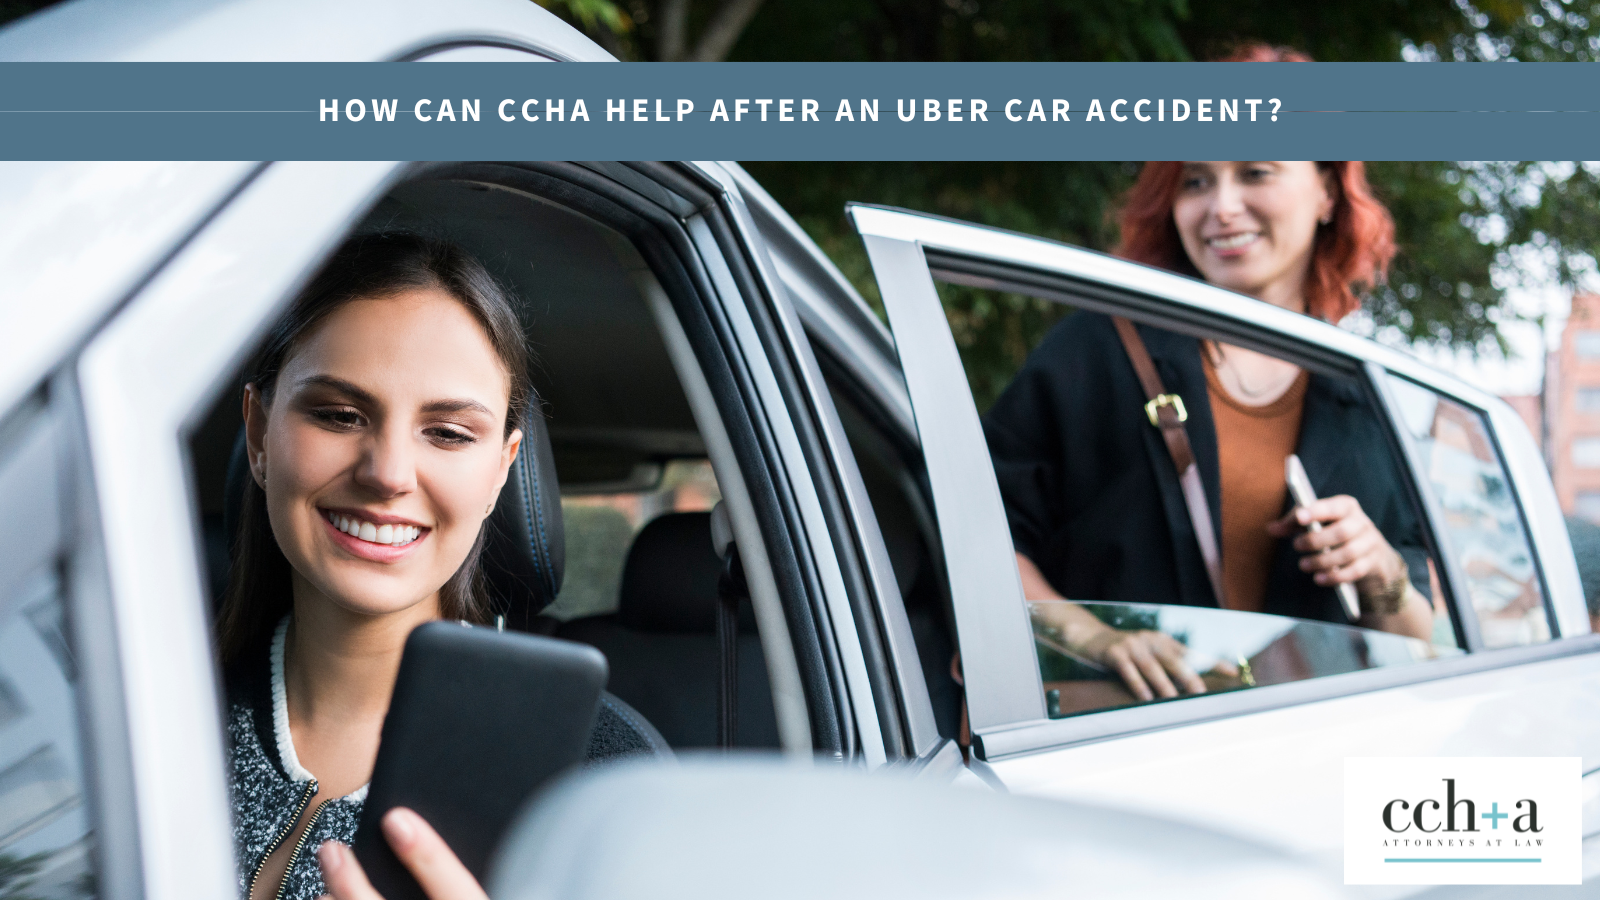 CCHA How Can CCHA Help After an Uber Car Accident blog post